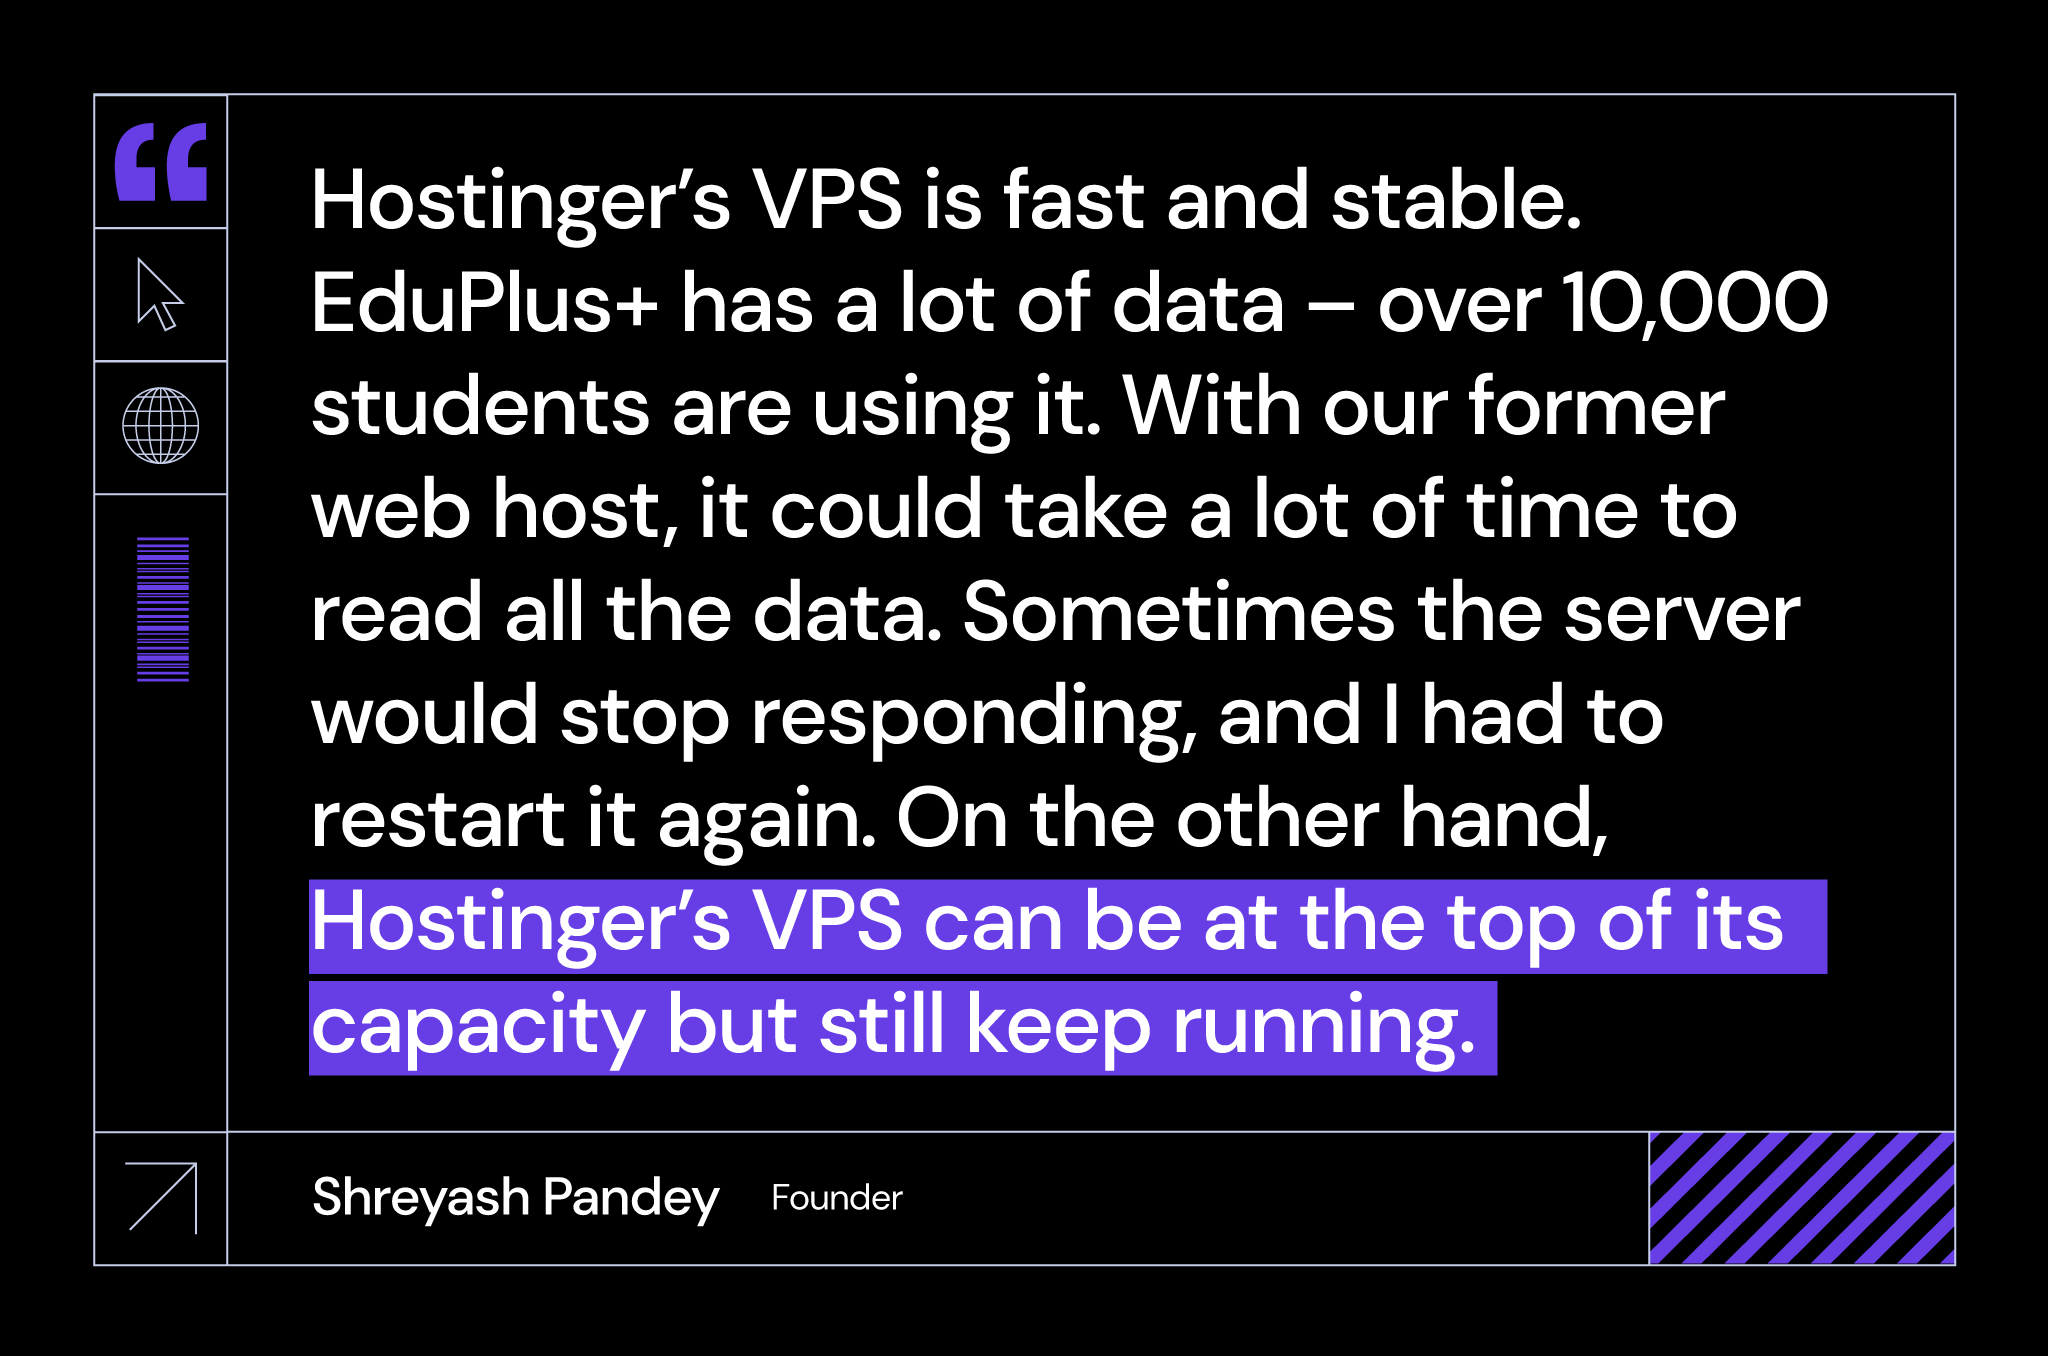 Shreyash Pandey of Ethereal Corporate Network sharing how fast and stable the performance of Hostinger's VPS is